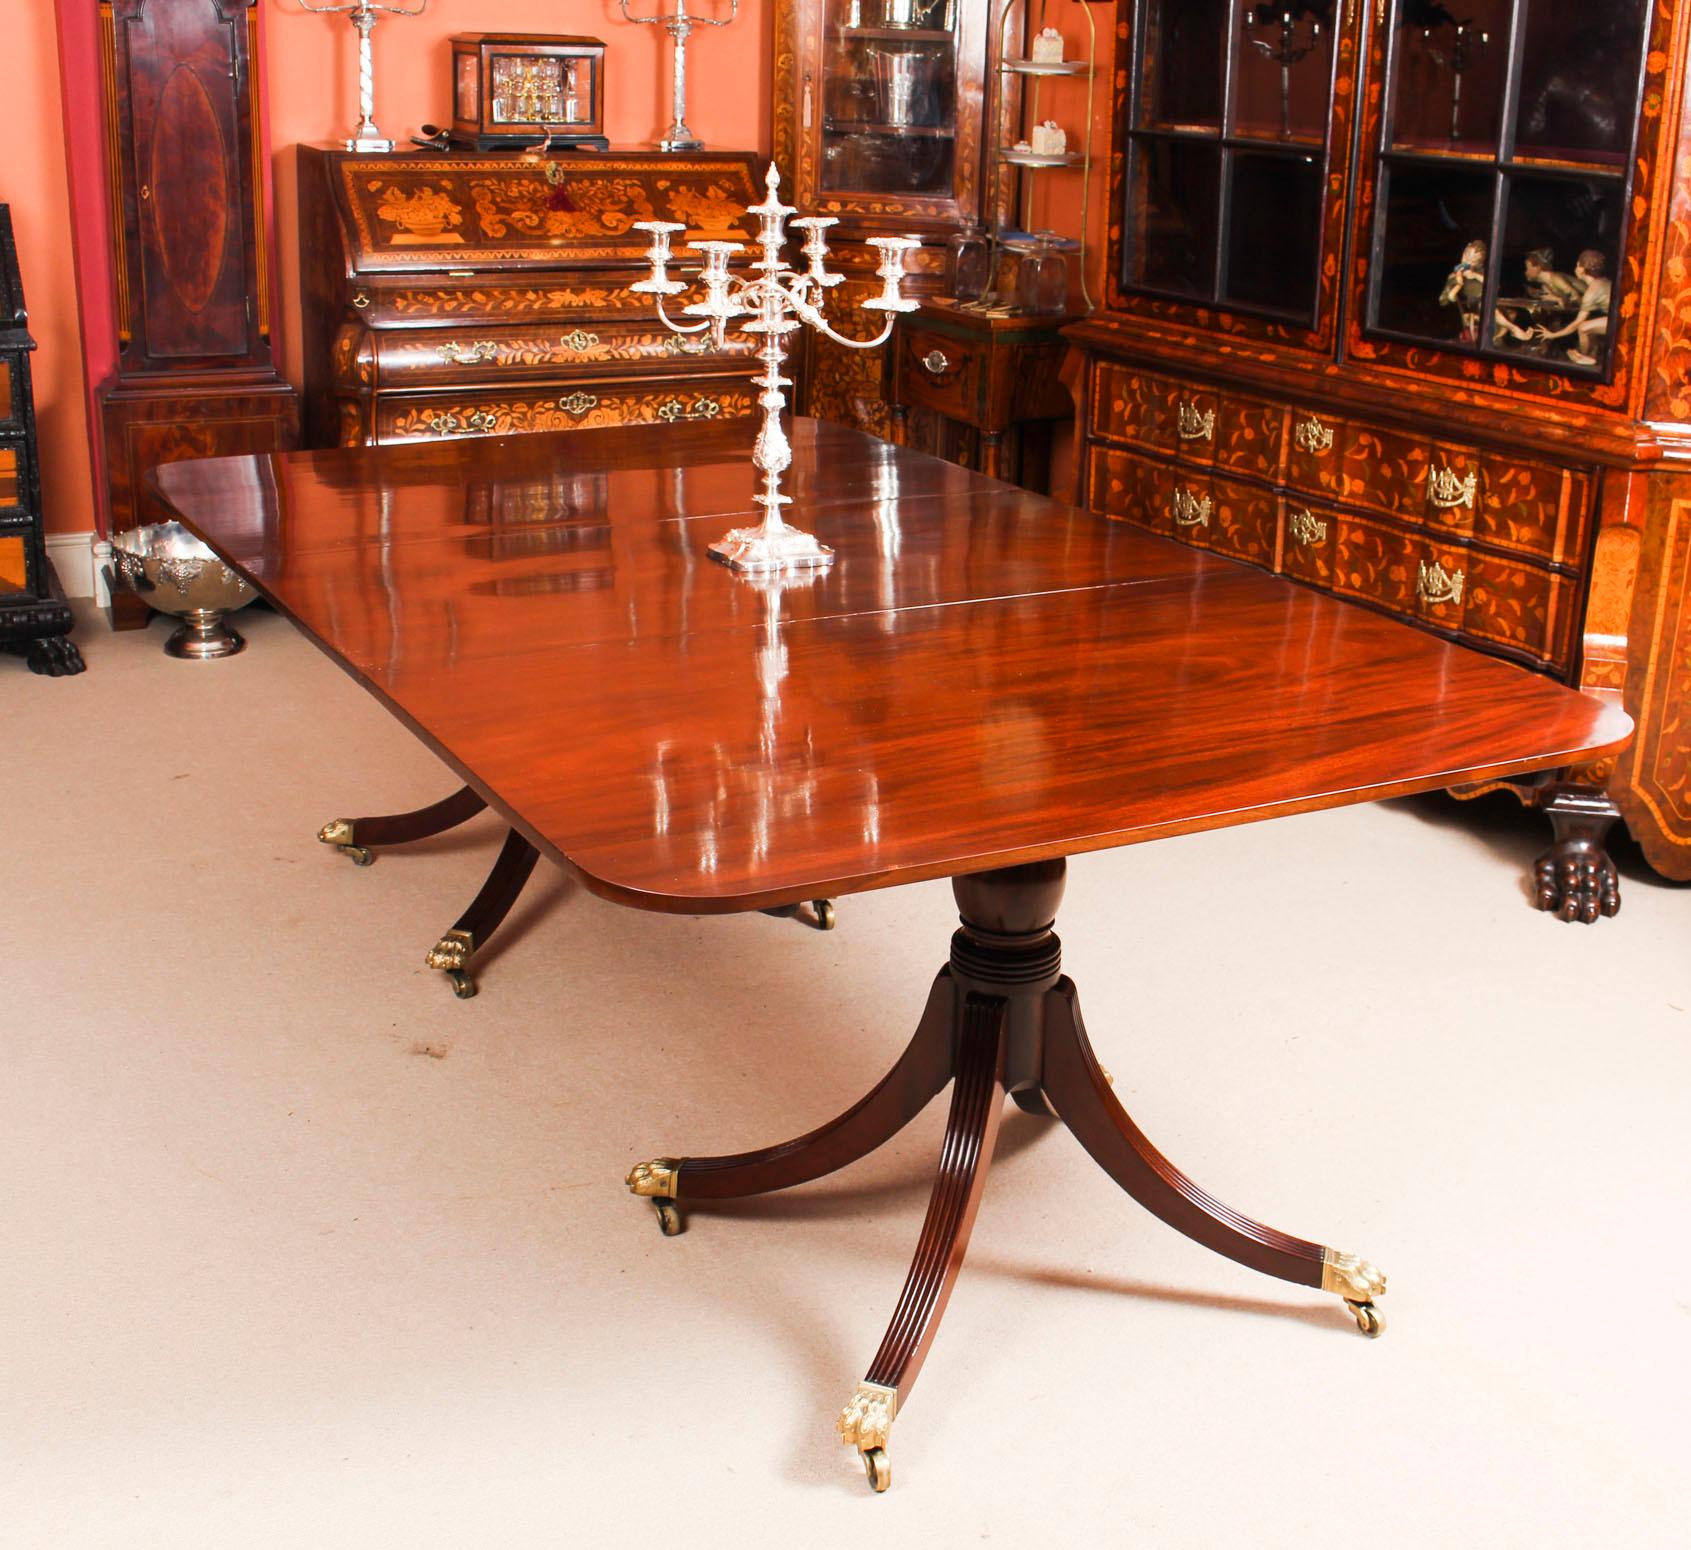 This is an elegant antique Regency dining table that can comfortably seat eight people, dating from circa 1820.

The table has one leaf that can be added or removed as required to suit the occasion and stands on twin 